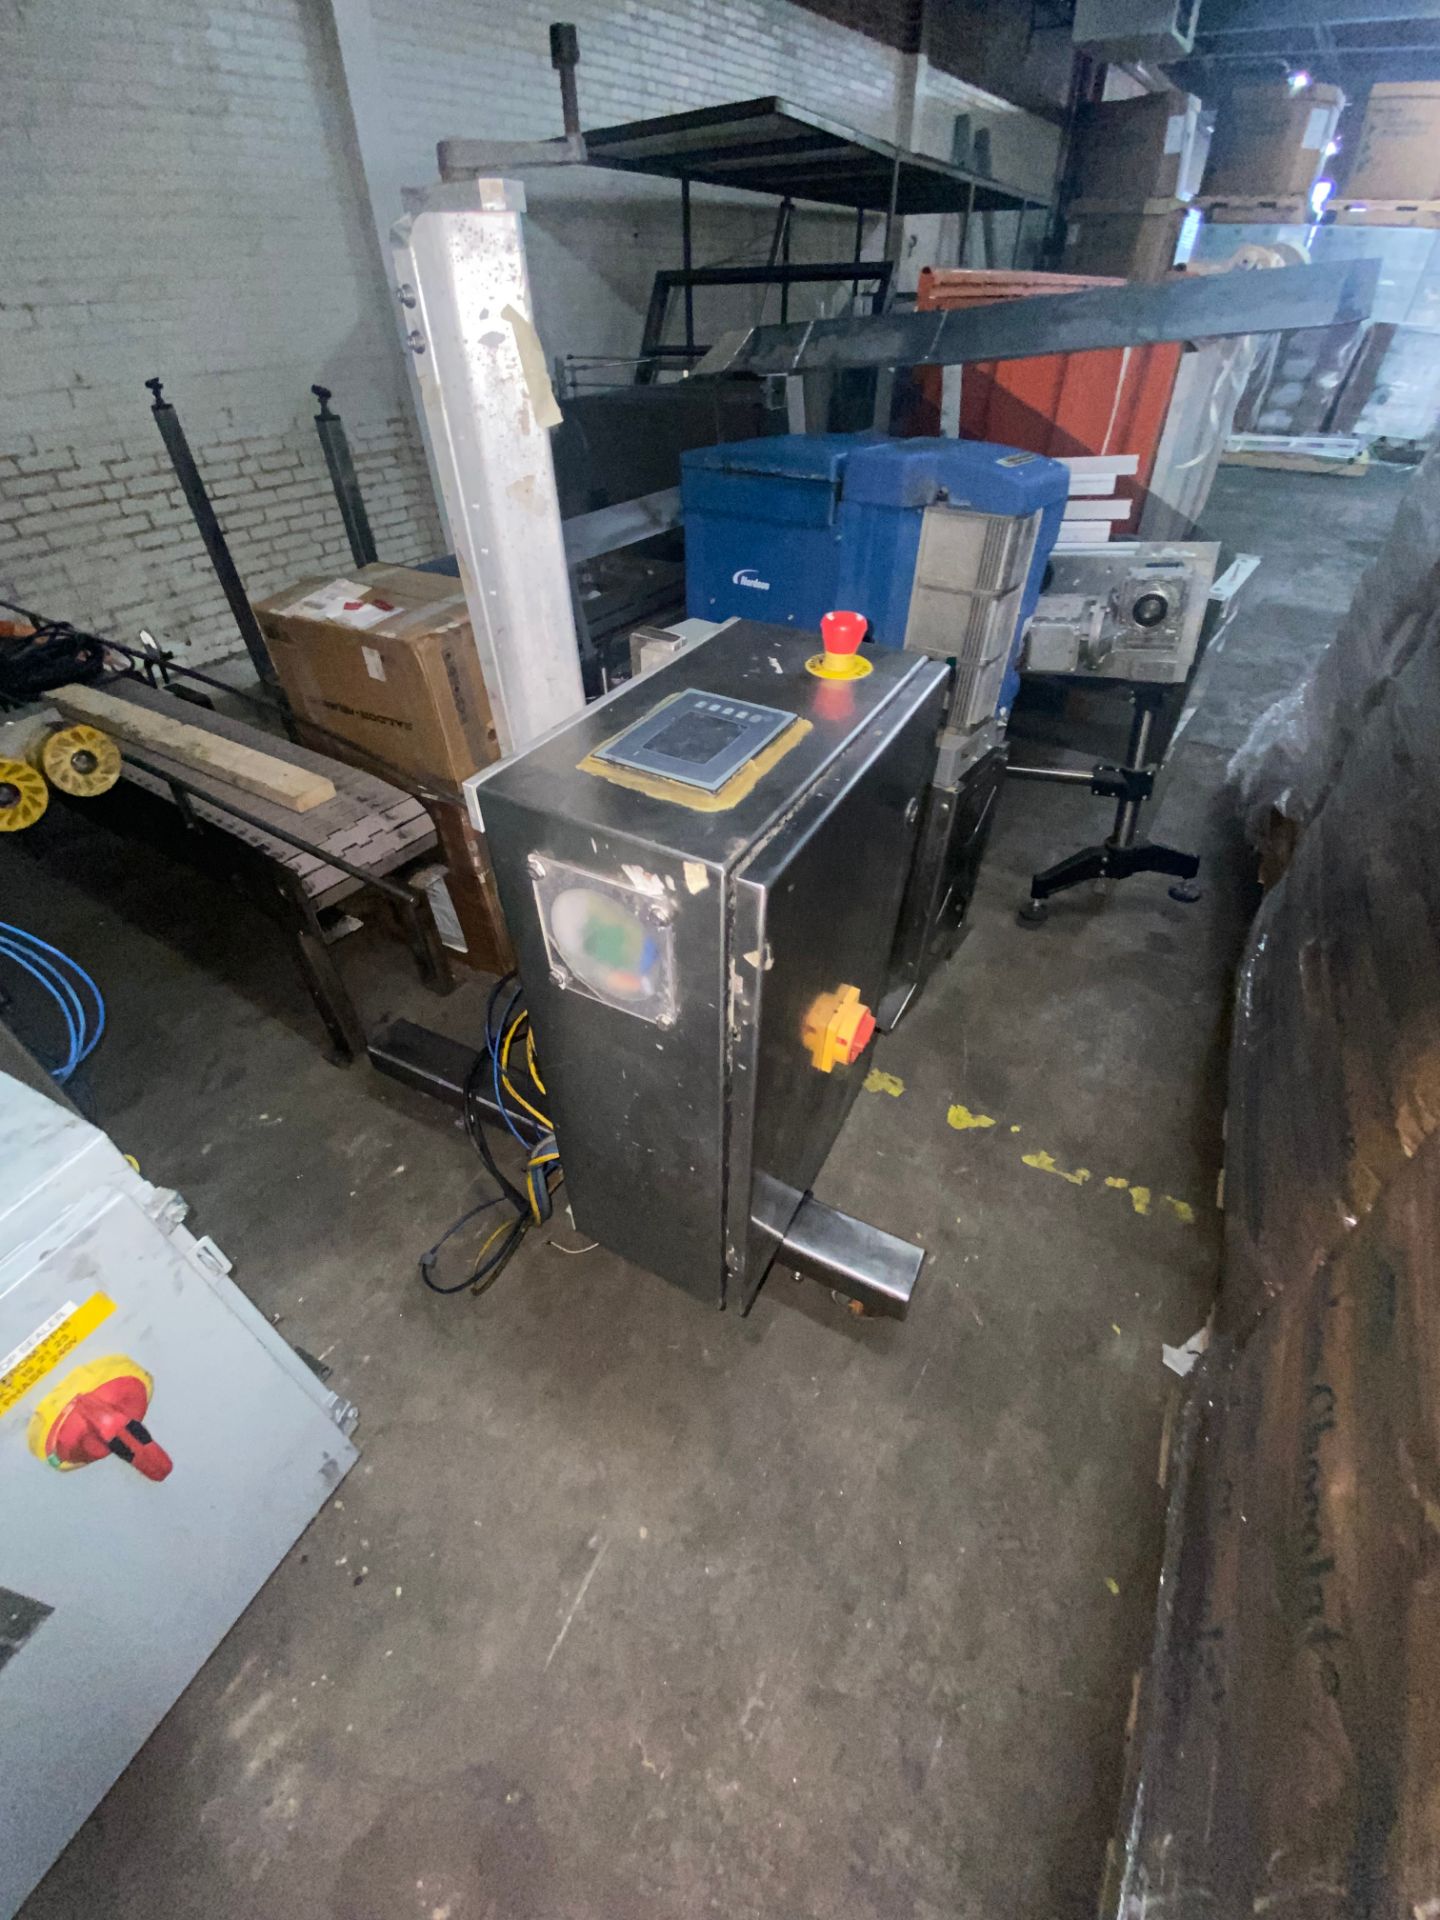 Labeler, Mounted on Portable Frame (LOCATED IN BALTIMORE, MD) (Loading, Rigging, & Site Management - Image 2 of 4